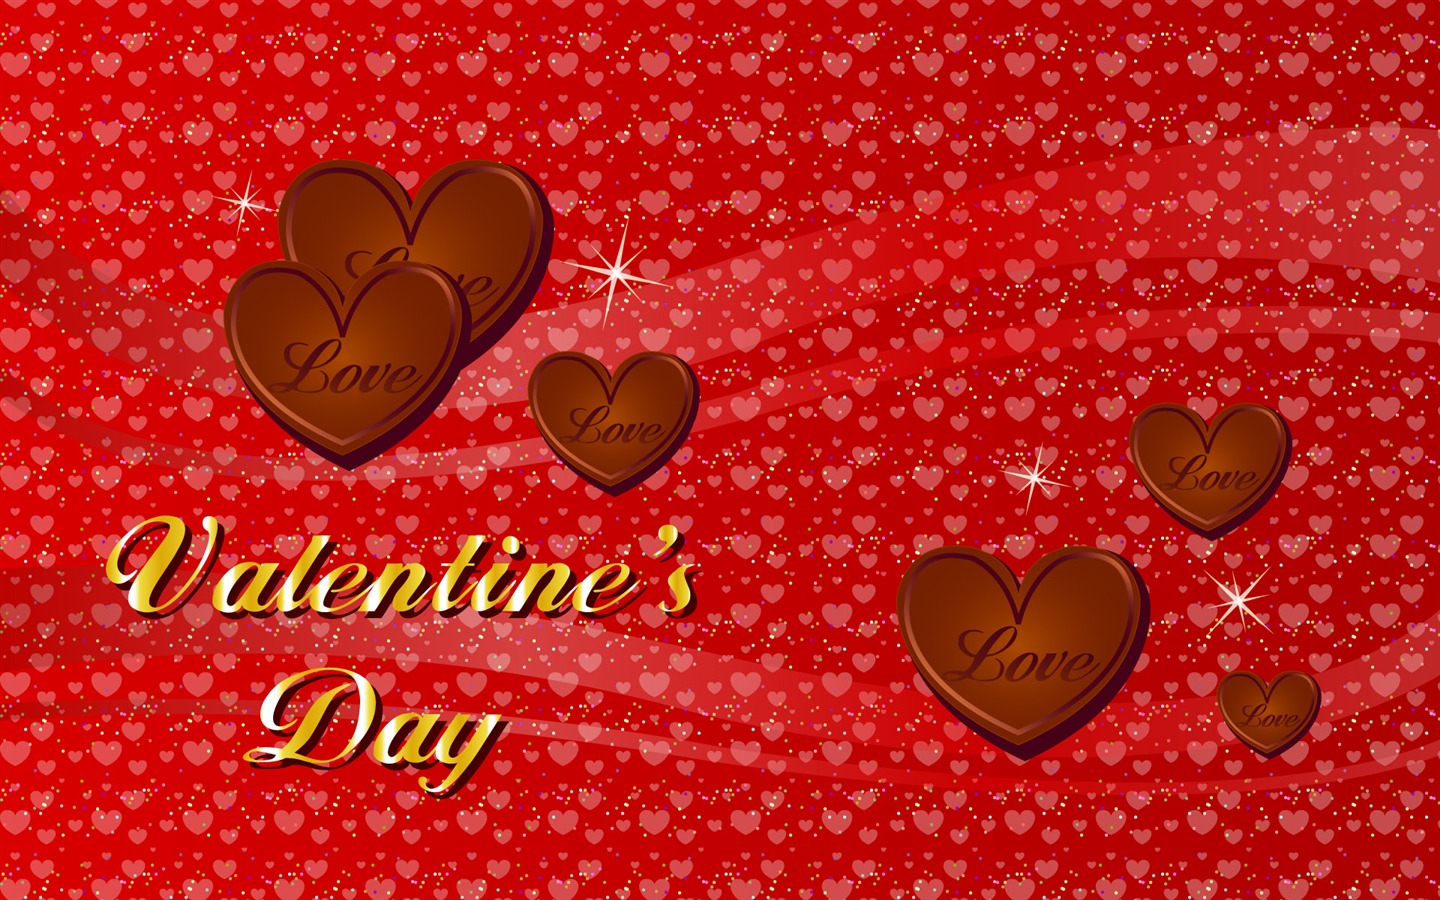 Valentine's Day Theme Wallpapers (1) #14 - 1440x900